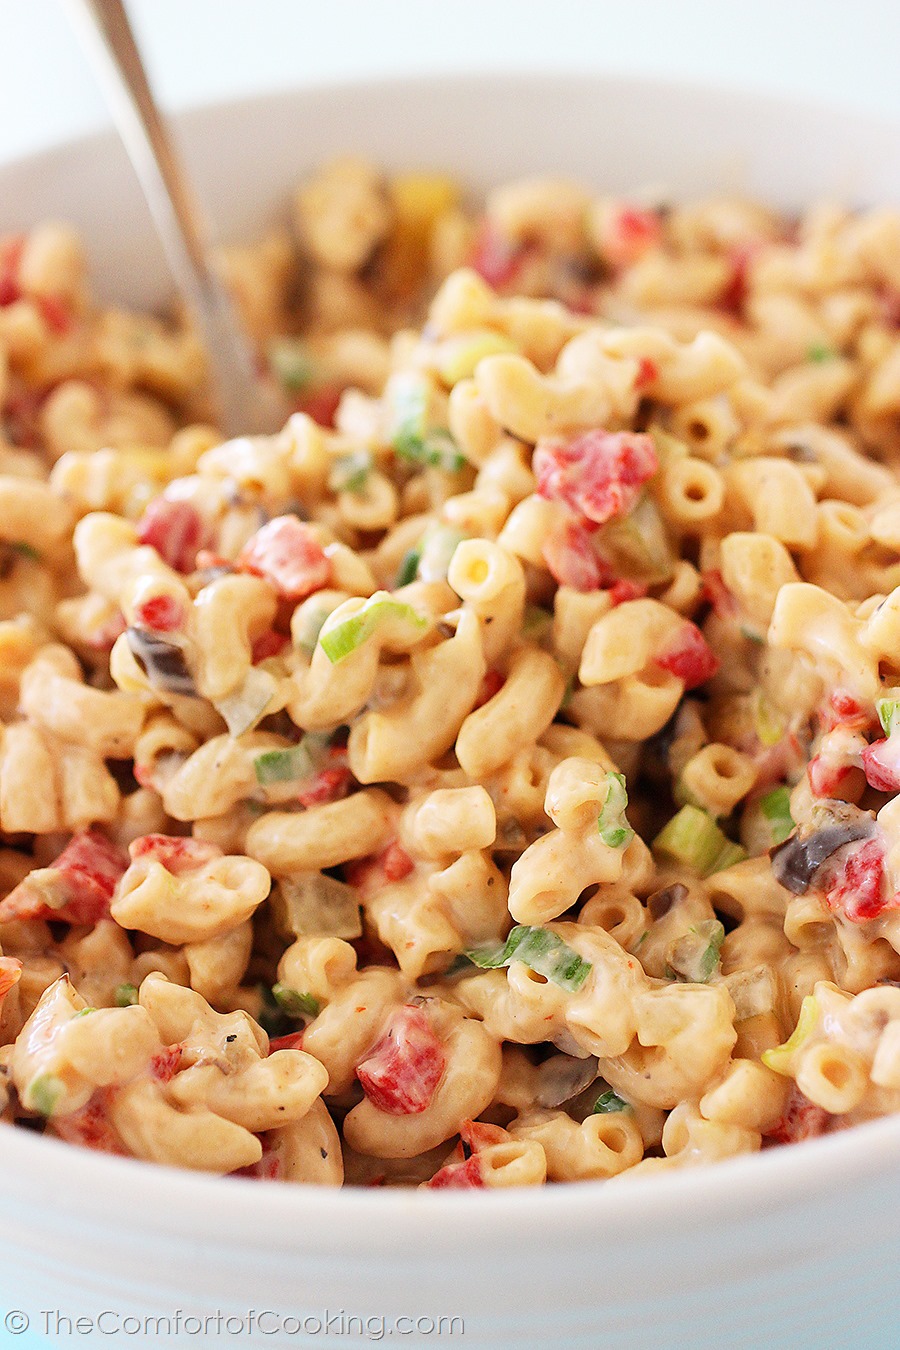 Best-Ever Creamy Macaroni Salad – For backyard BBQs or any occasion, bring the best-ever macaroni salad... creamy, tangy and full of veggies! | thecomfortofcooking.com